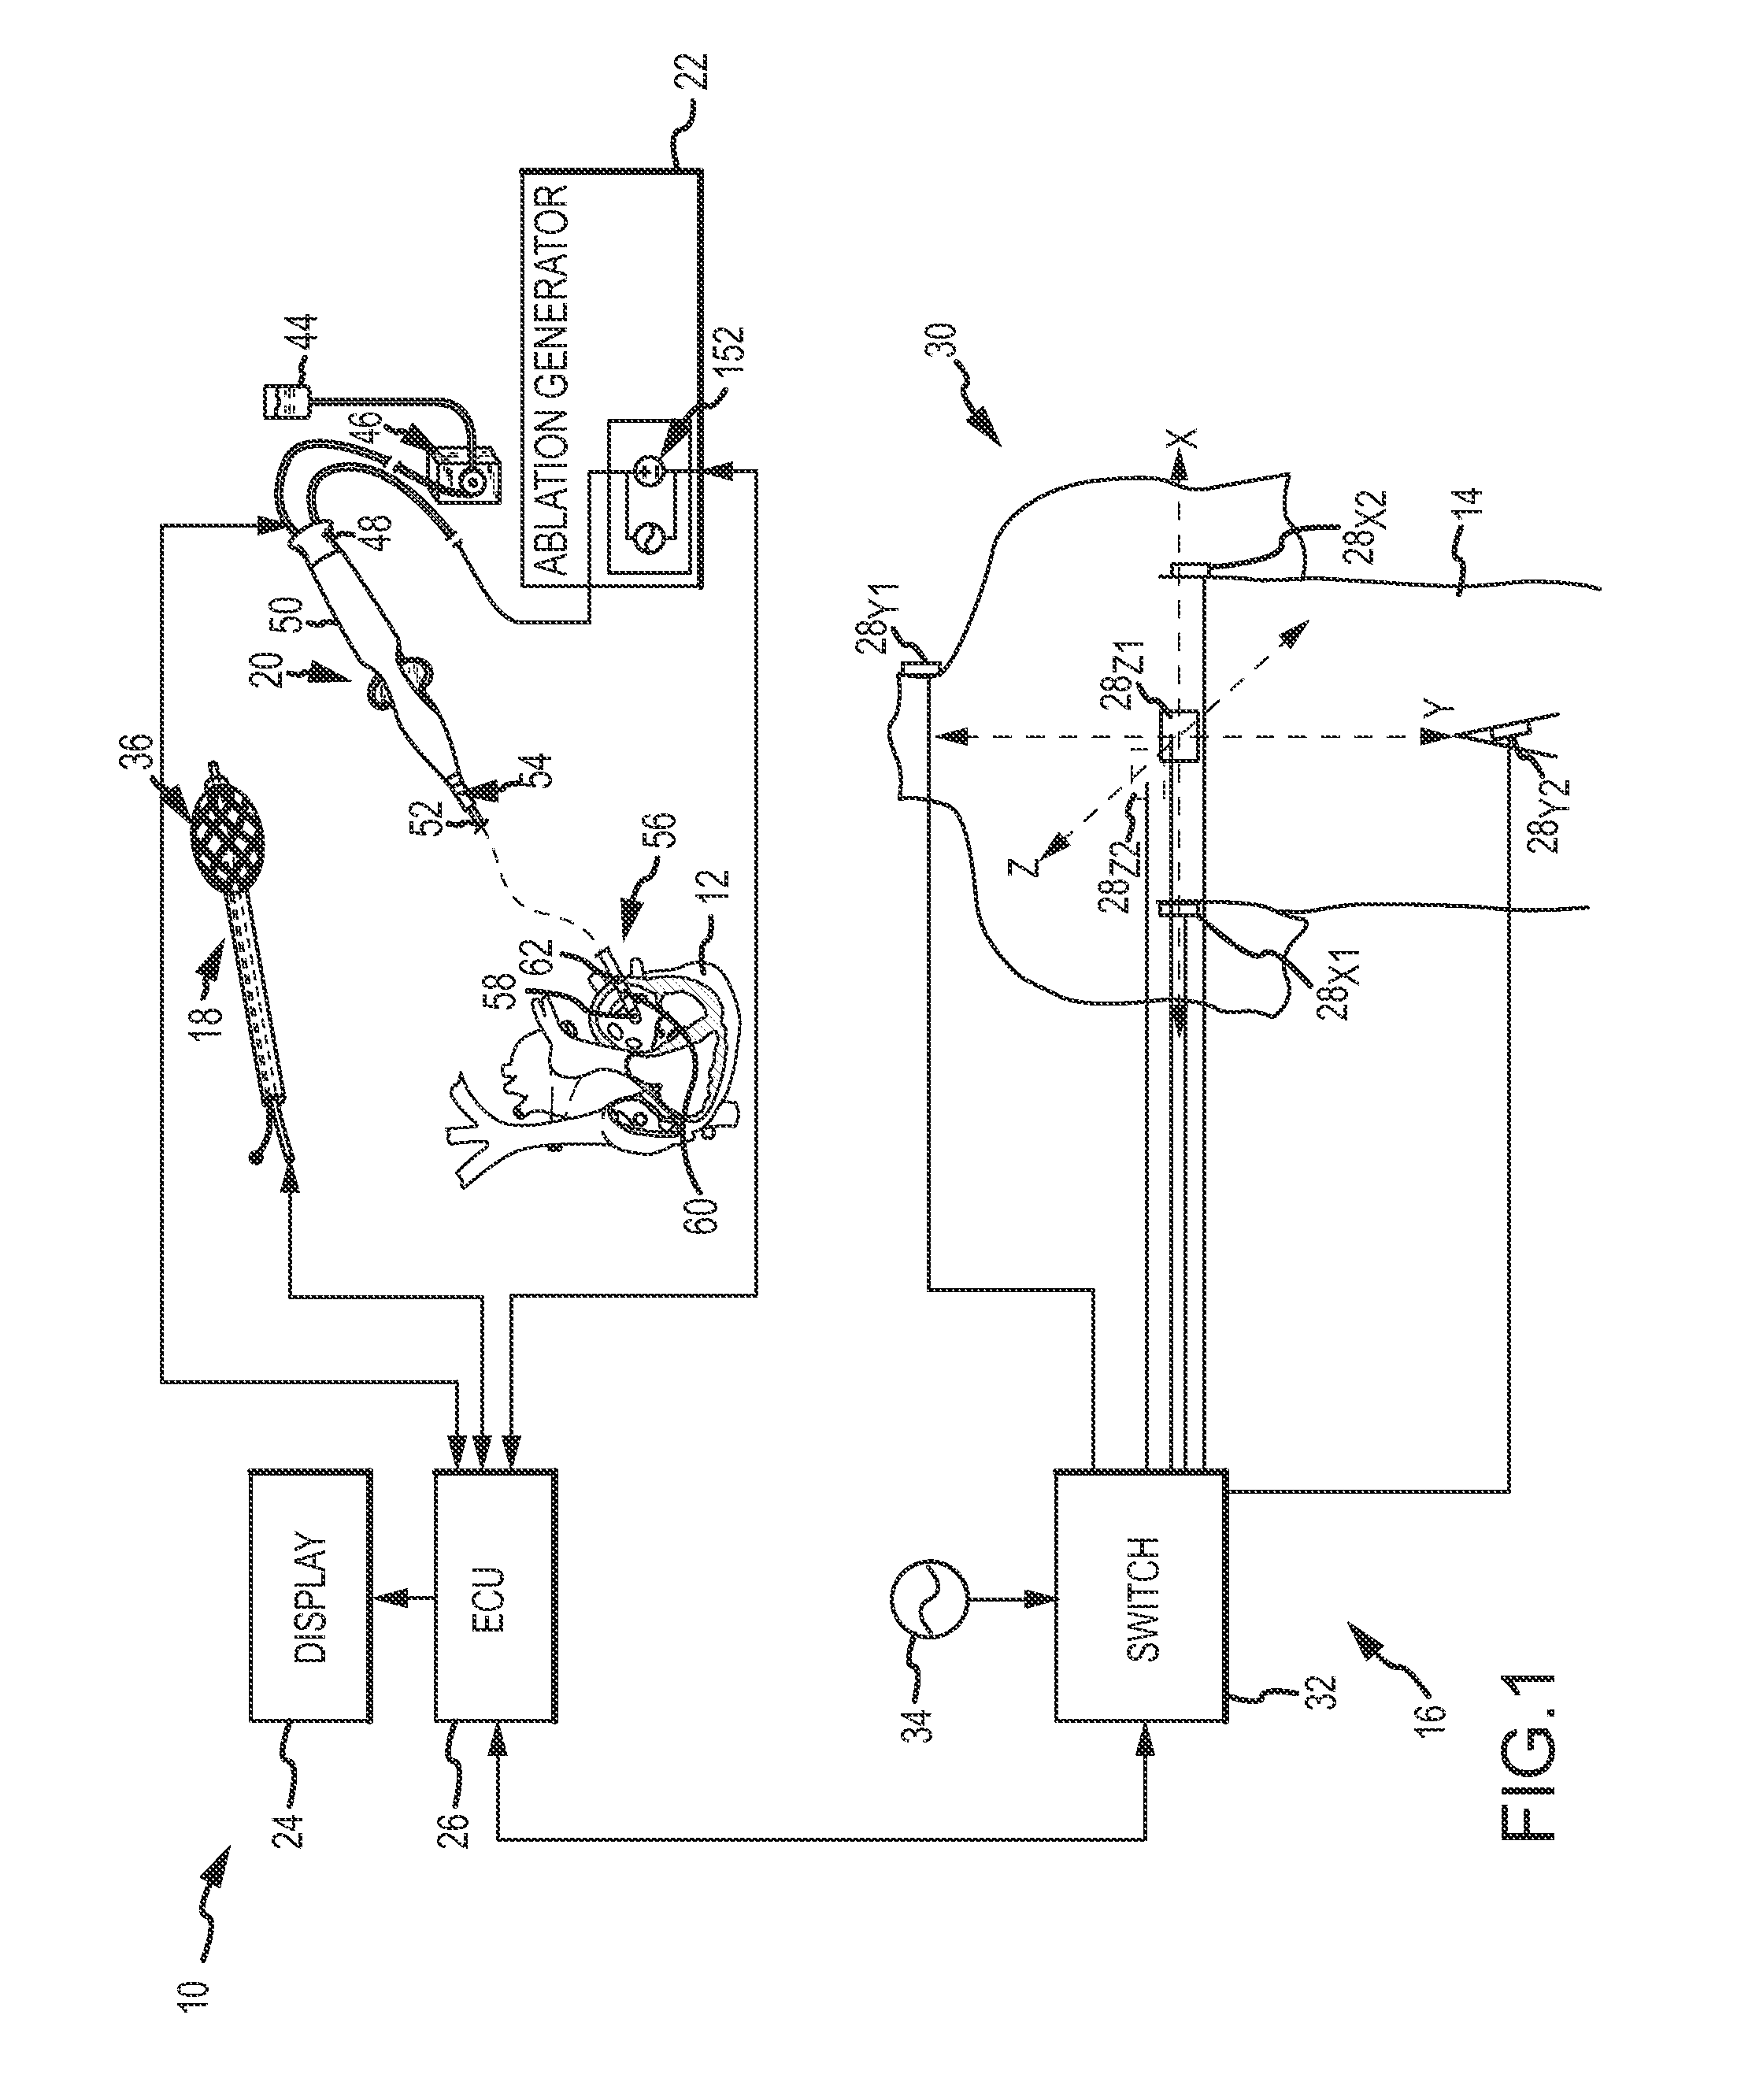 System for optimized coupling of ablation catheters to body tissues and evaulation of lesions formed by the catheters